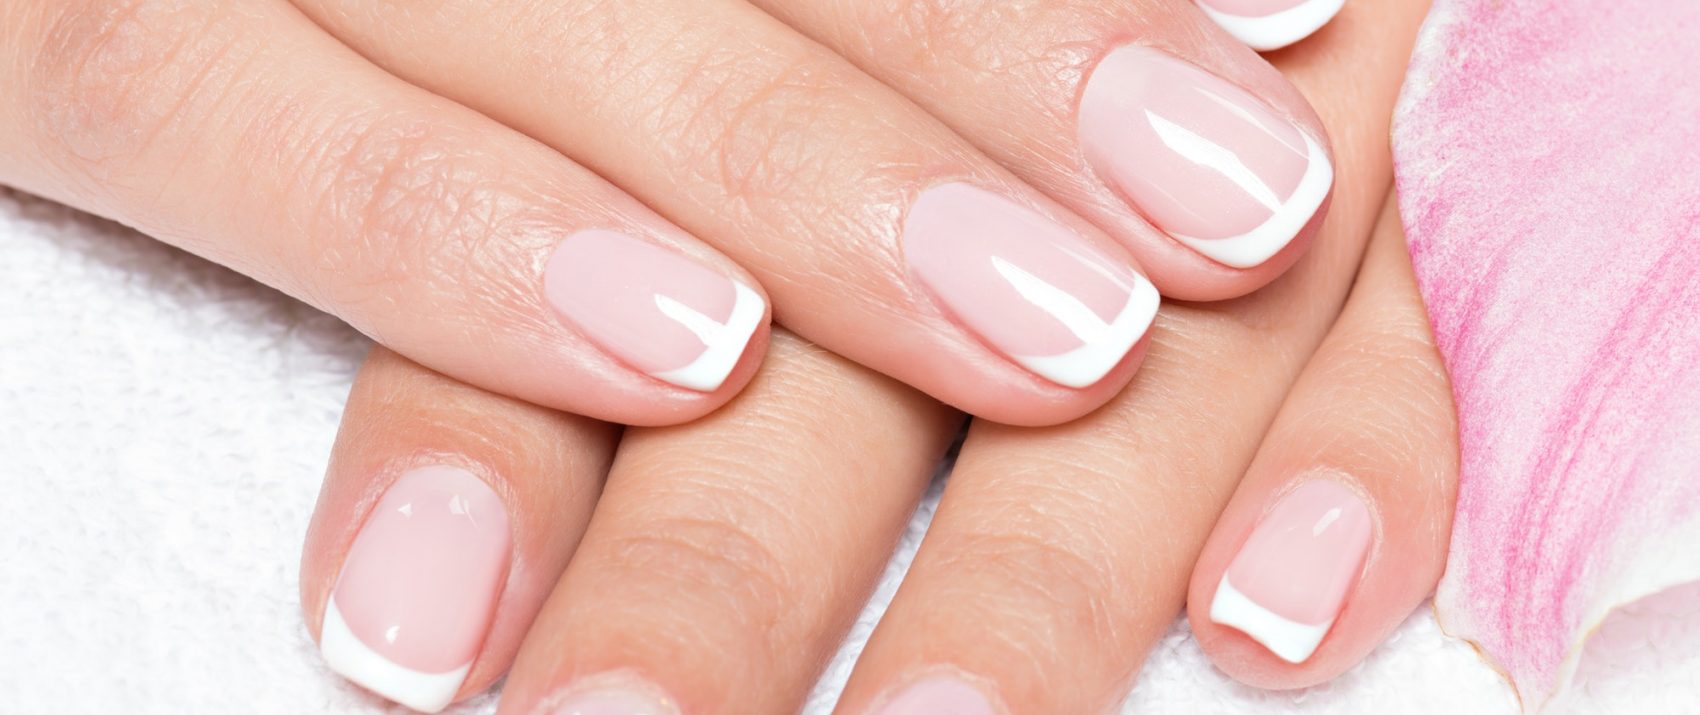 Beautiful woman's nails with french manicure